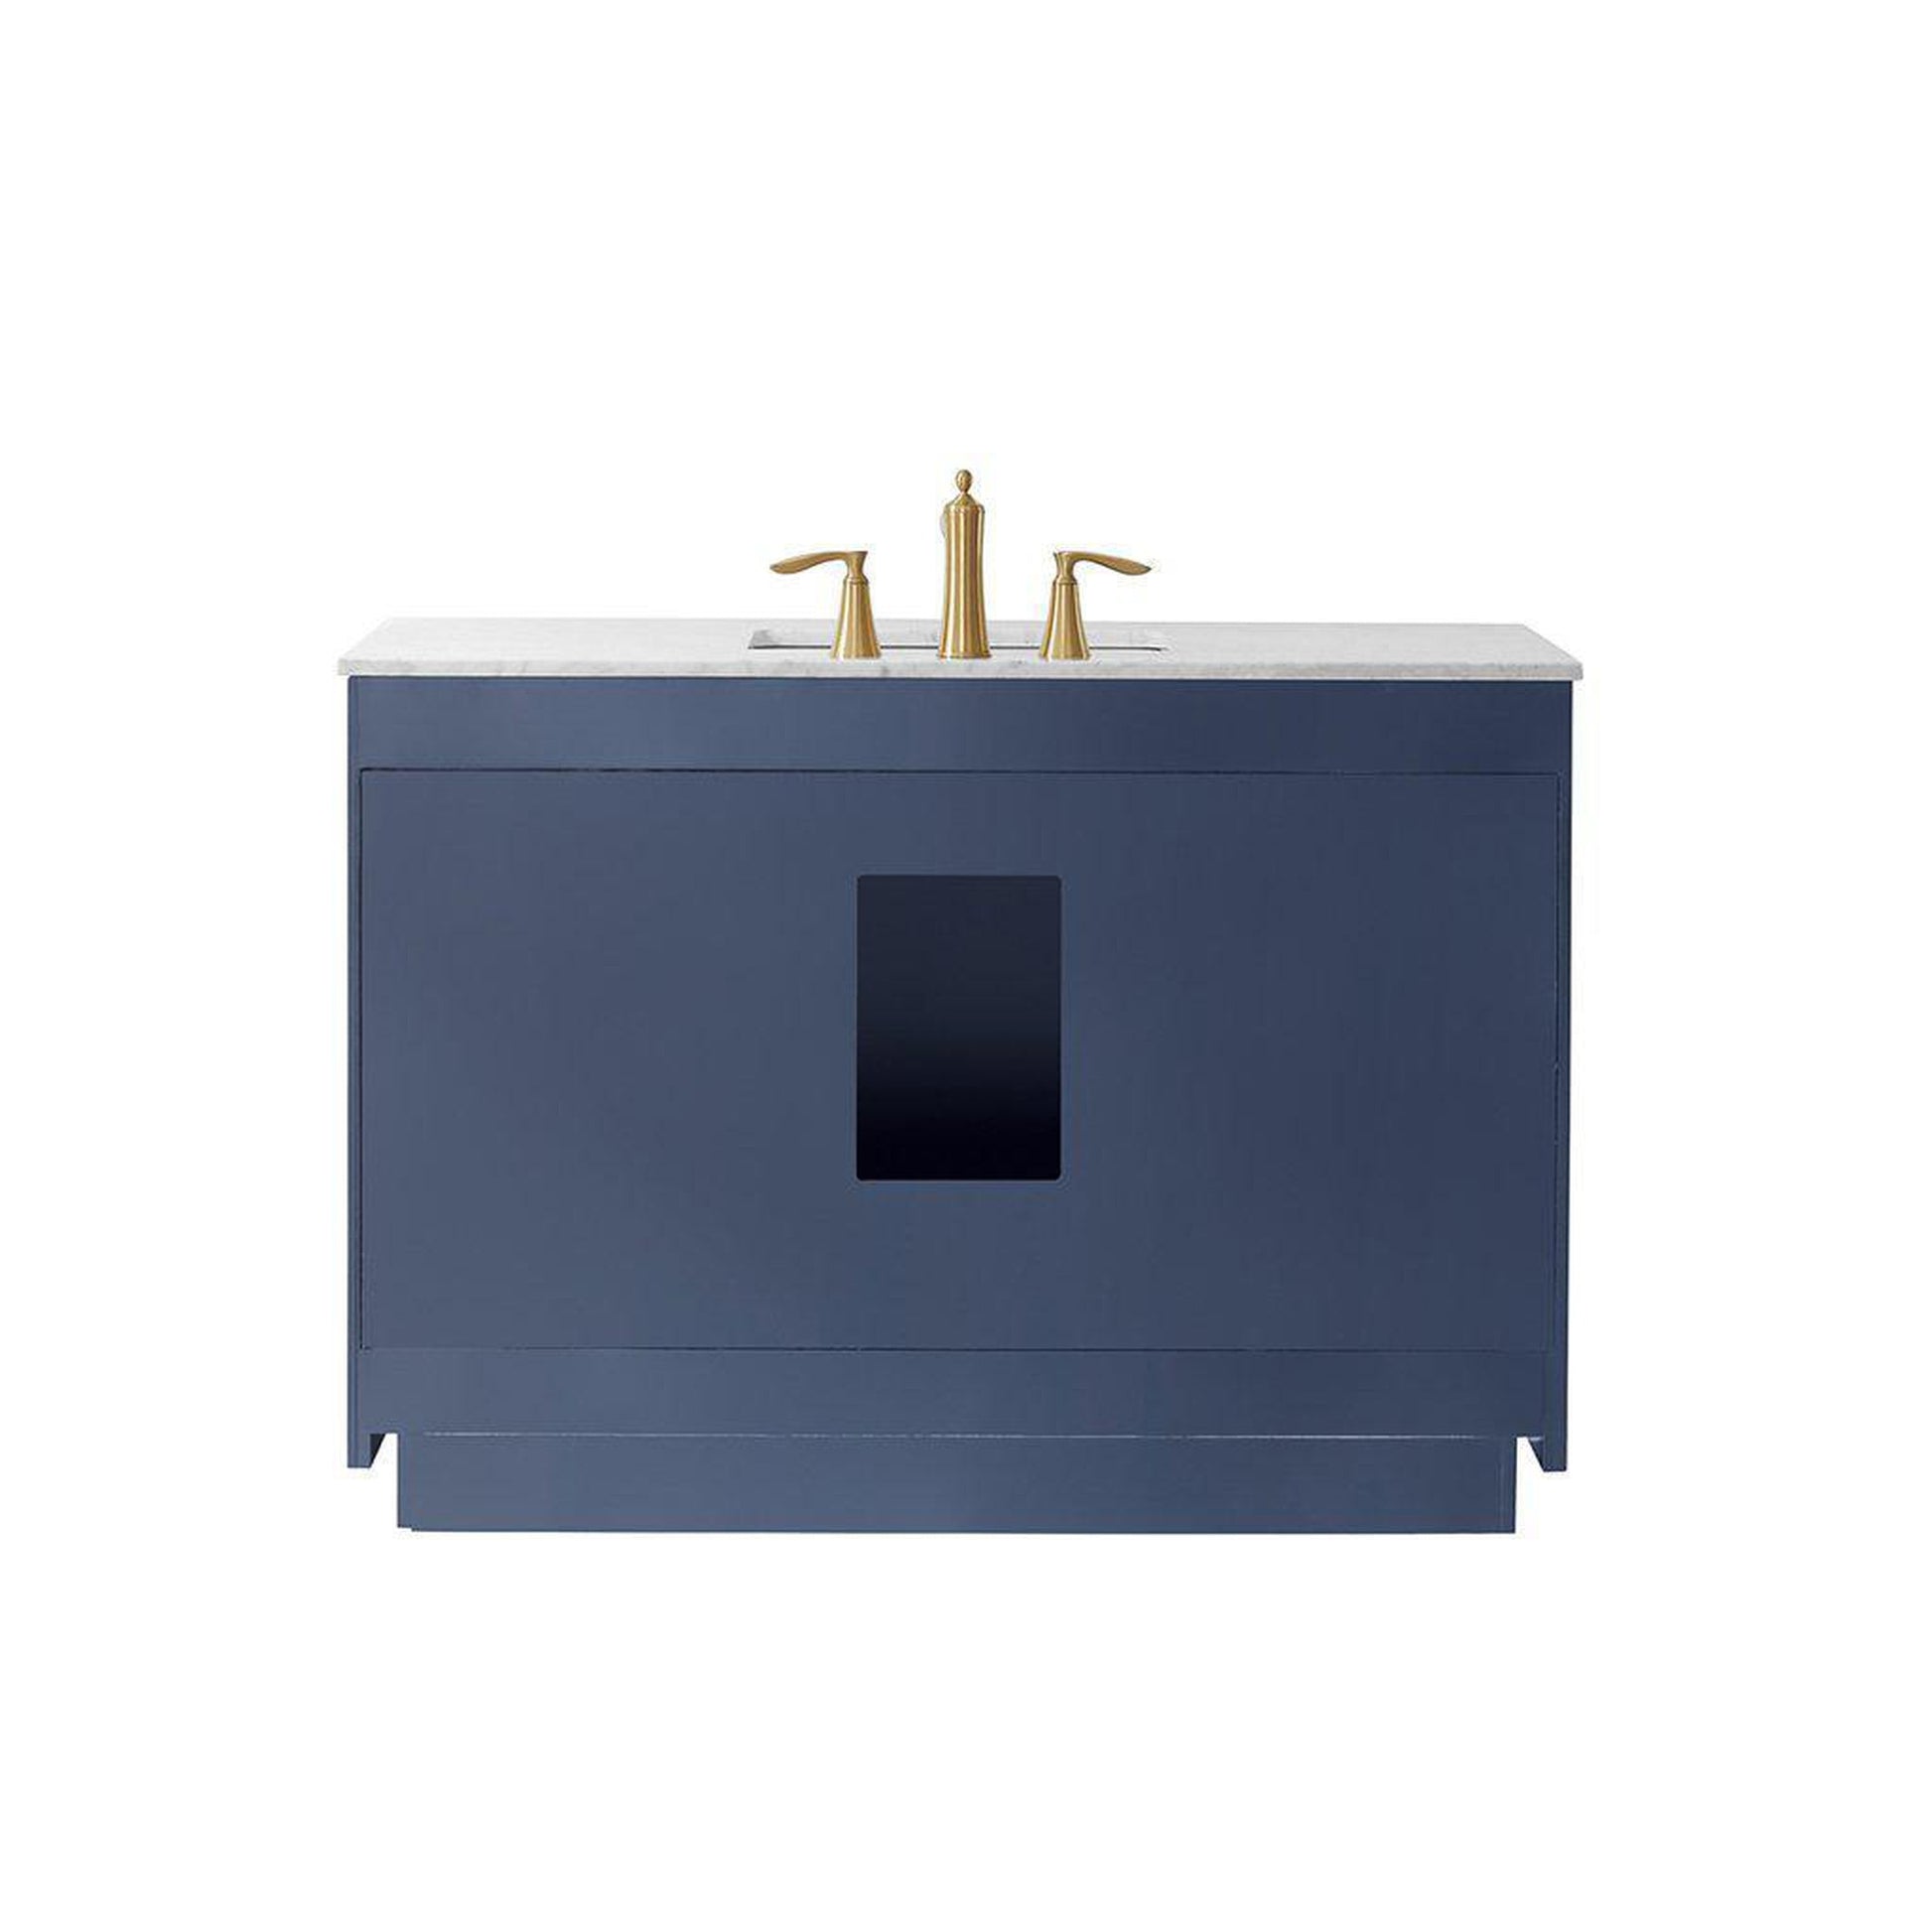 Altair Ivy 48" Single Royal Blue Freestanding Bathroom Vanity Set With Natural Carrara White Marble Top, Rectangular Undermount Ceramic Sink, and Overflow